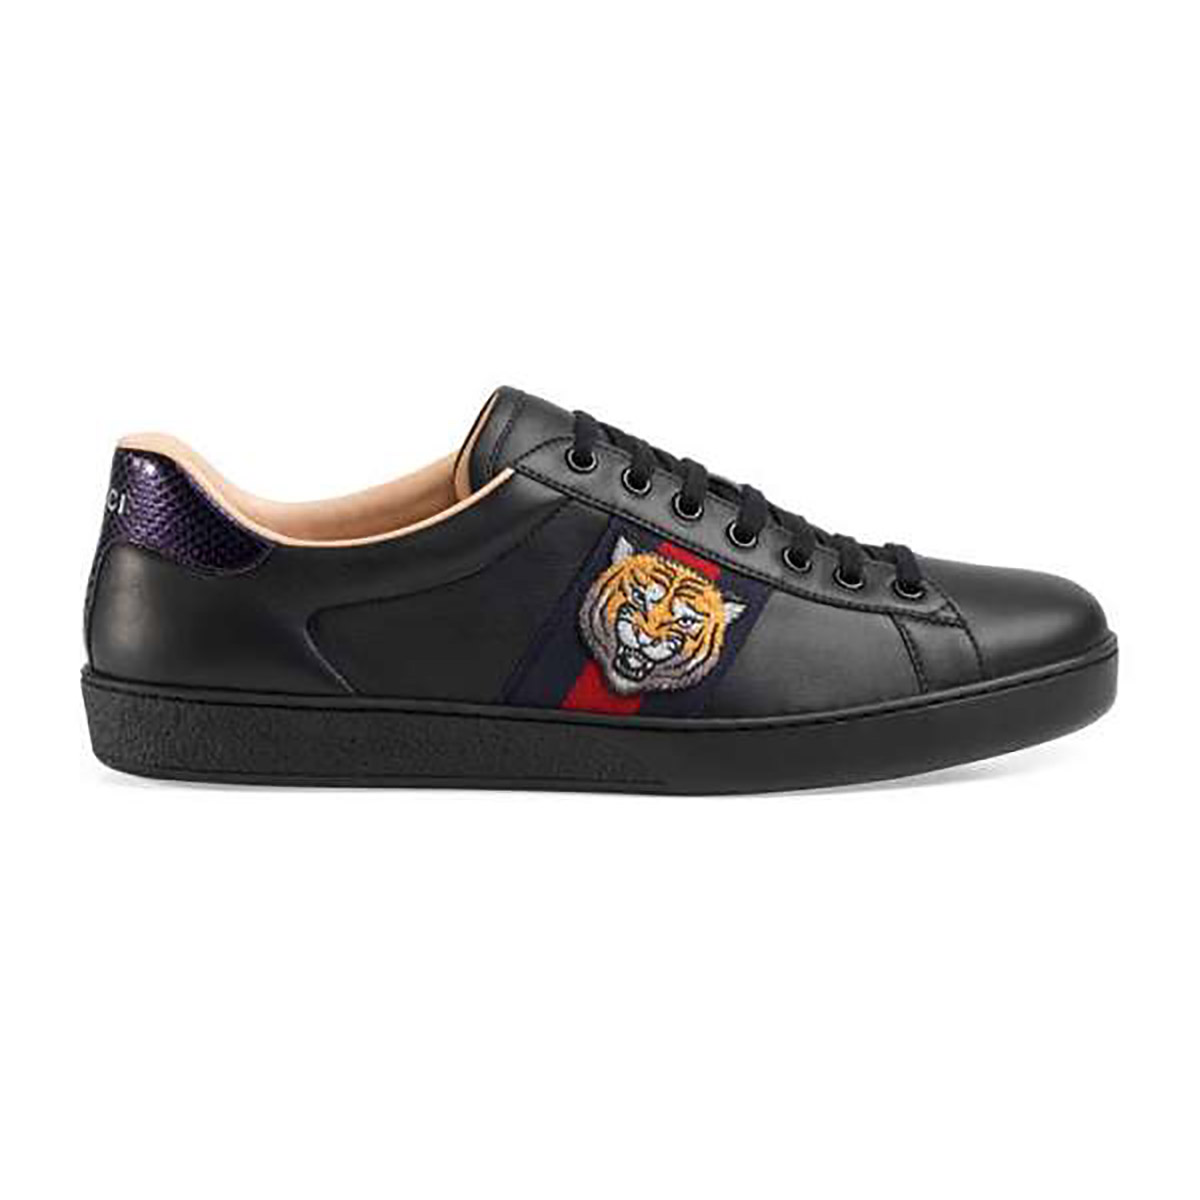 Gucci Men Ace Embroidered Sneaker Shoes 